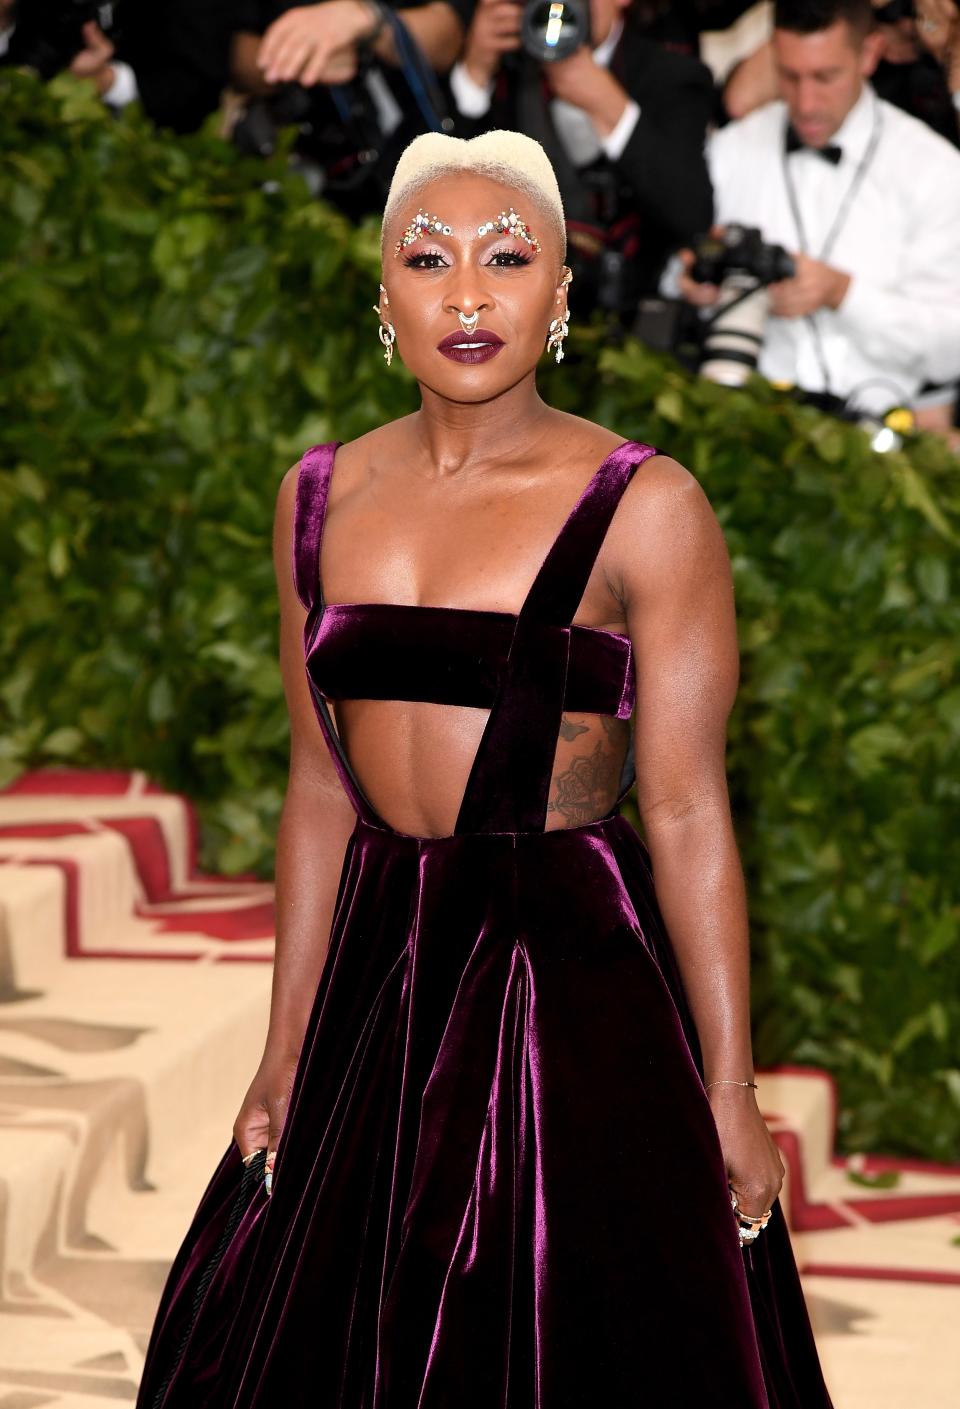 Actress Cynthia Erivo arrived at the Met Gala 2018 with seriously jaw-dropping nails: a rendition of the Sistine Chapel with two black women.